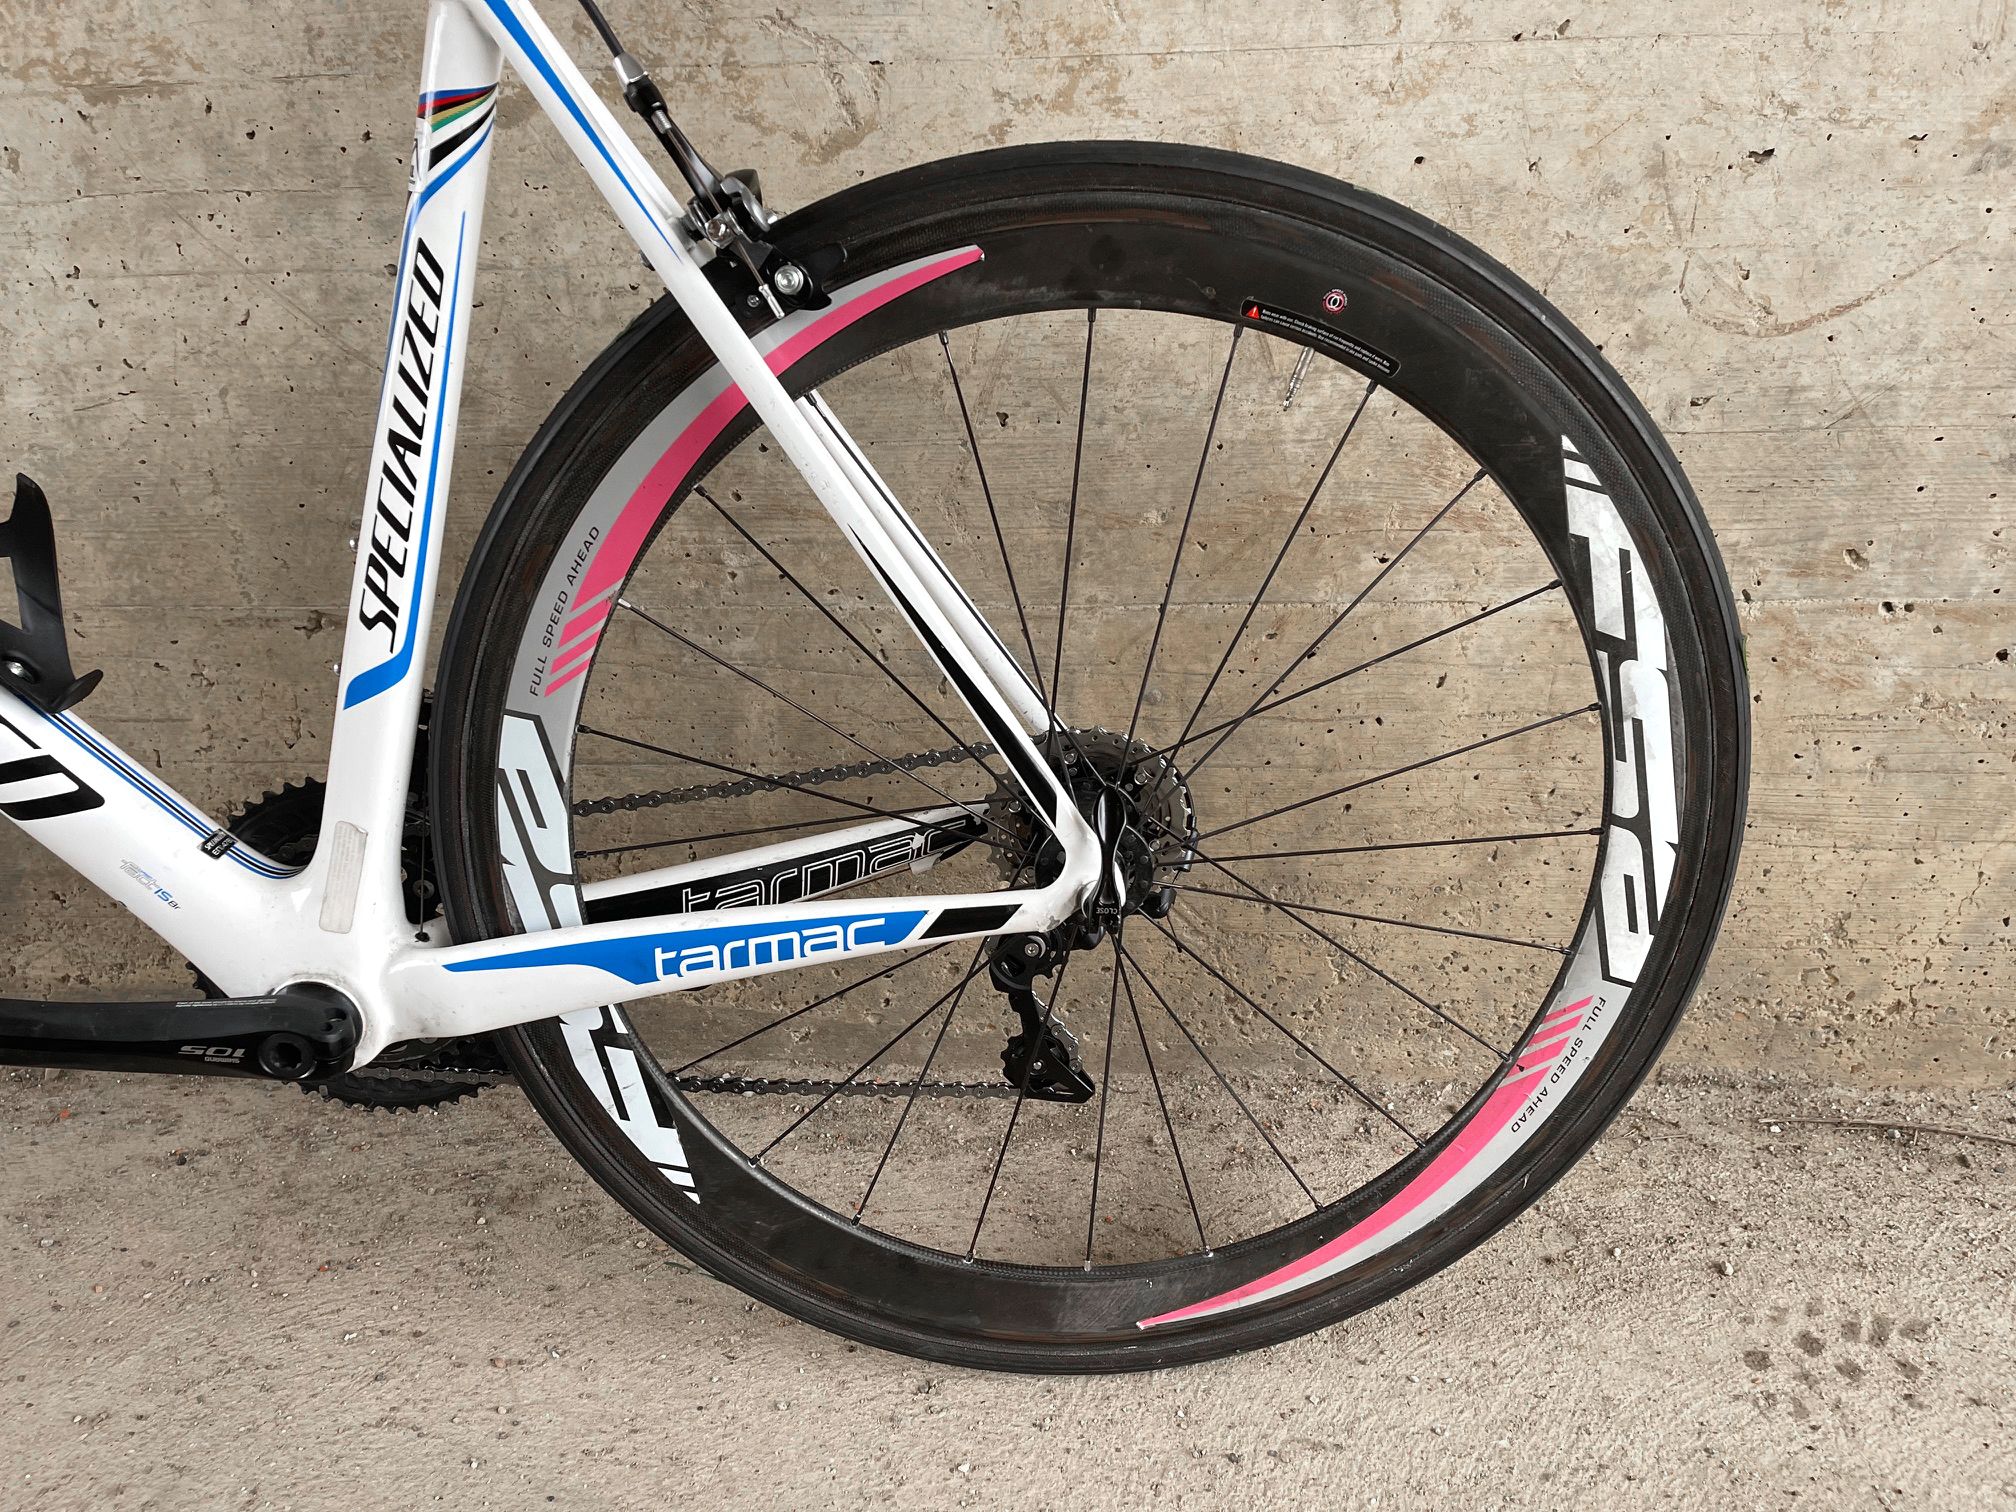 Specialized Tarmac SL4 used in 58 cm | buycycle CA